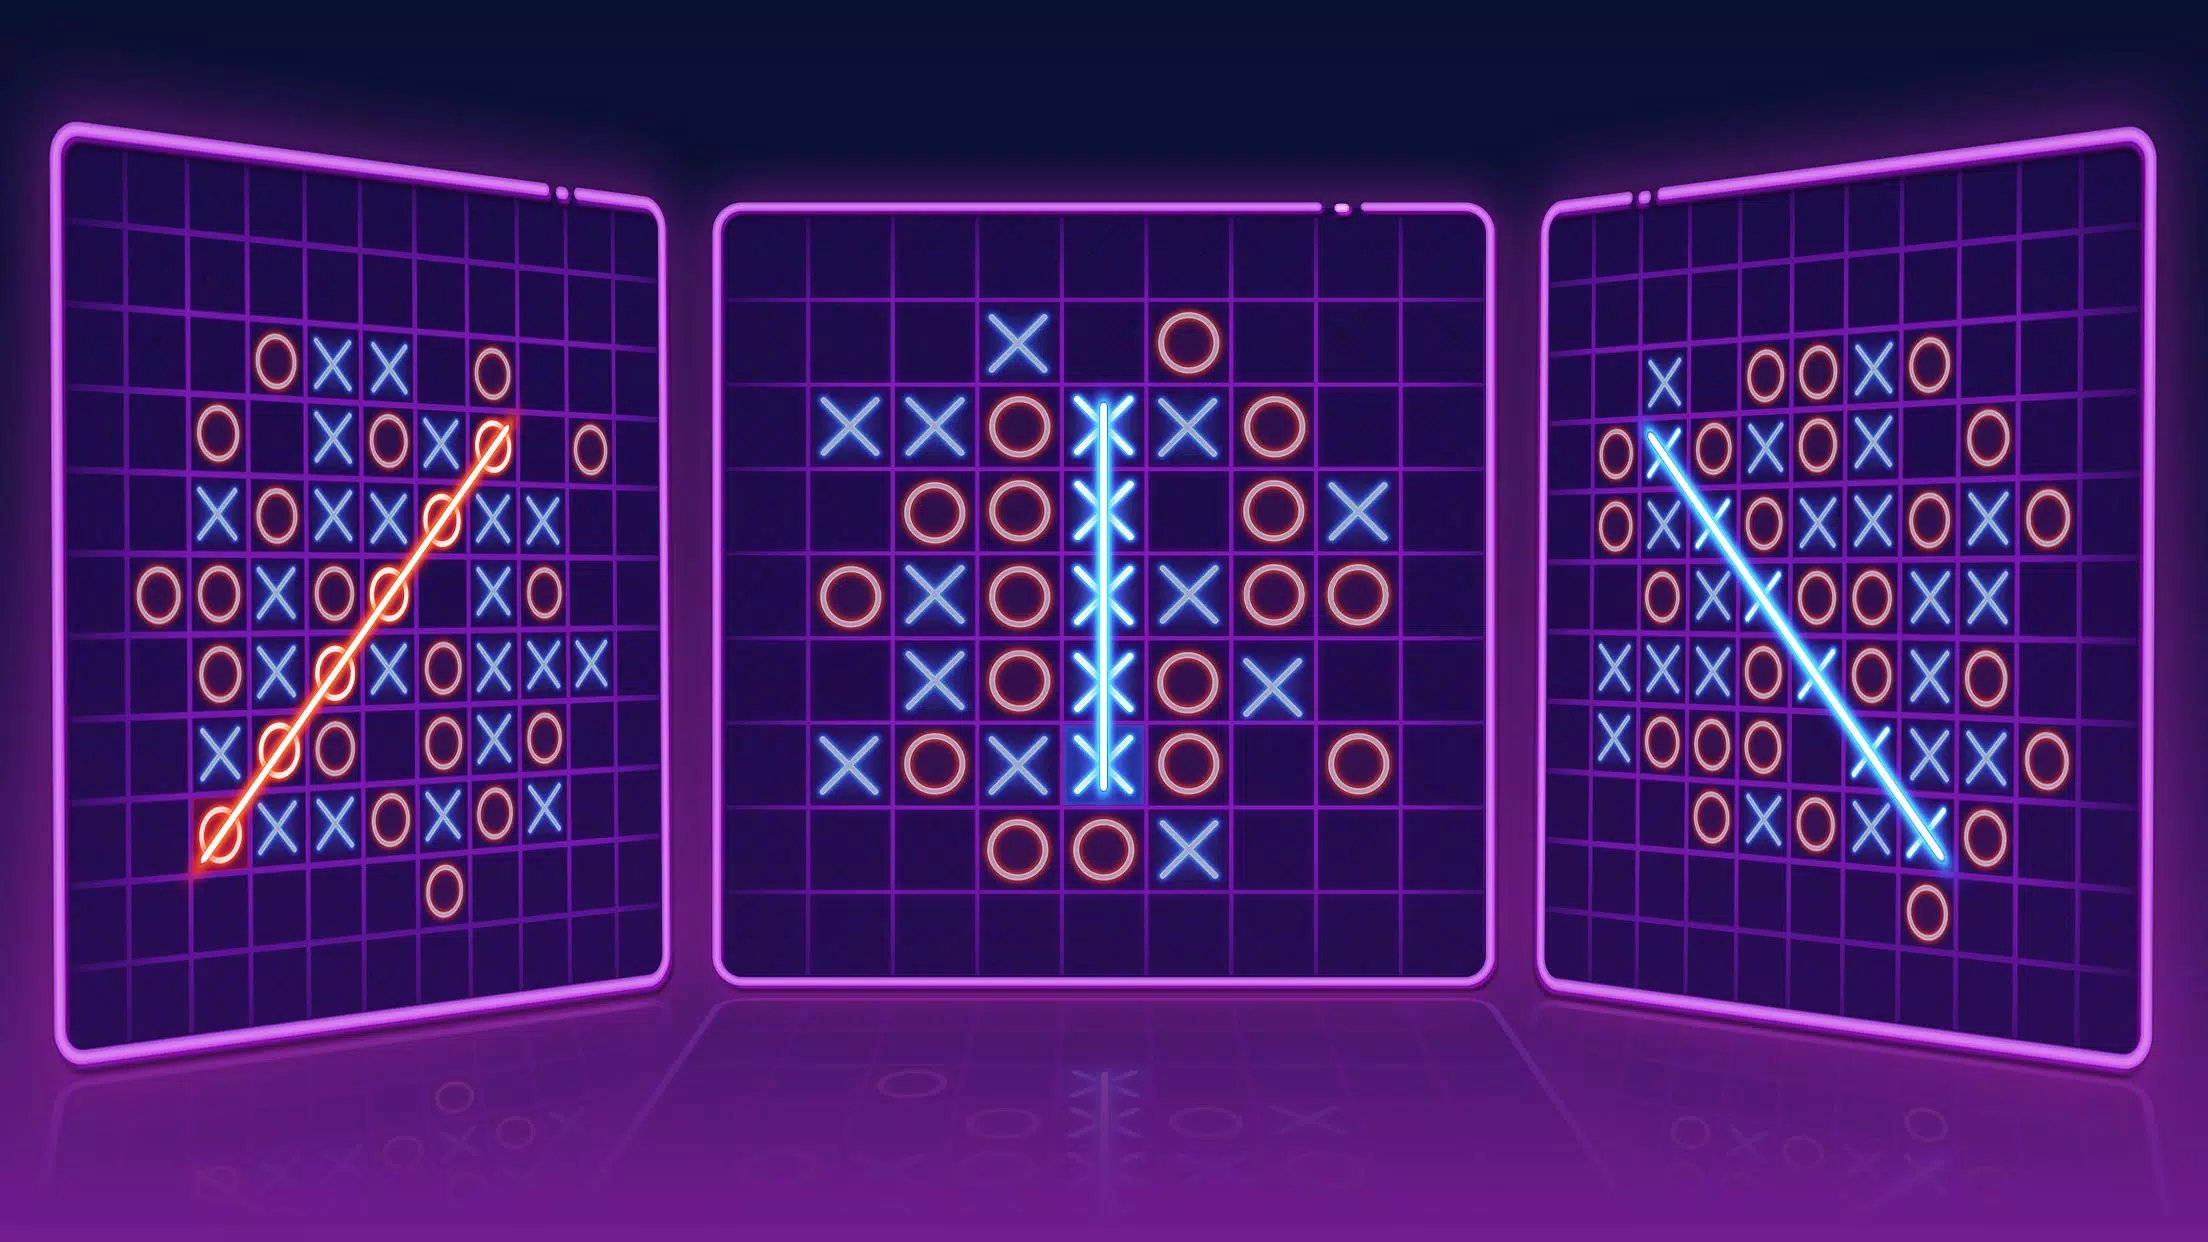 Tic Tac Toe - Horror Zone APK for Android Download